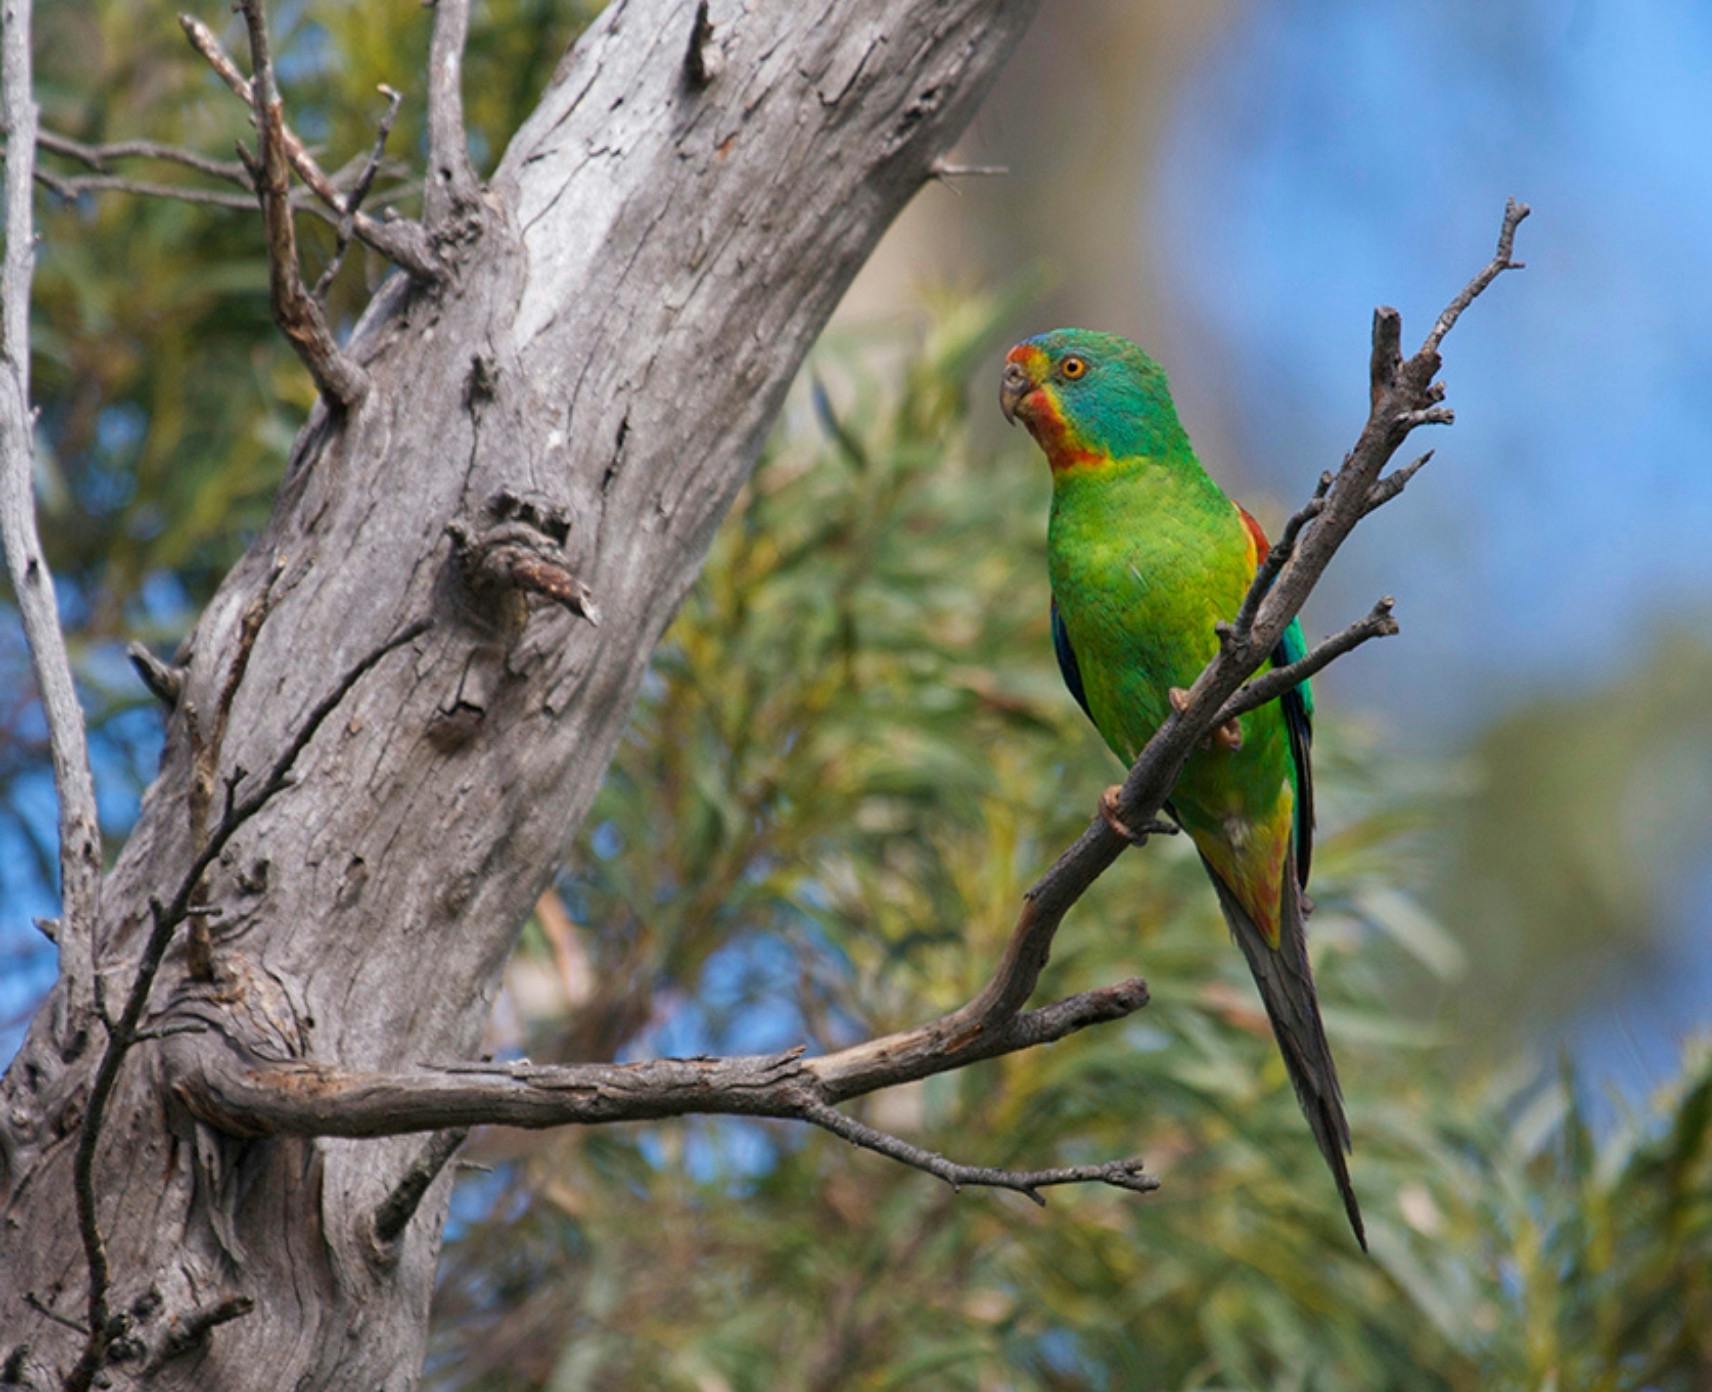 A green parrot, with red, yellow and blue feathers near its beak sits on a twig in a tree.